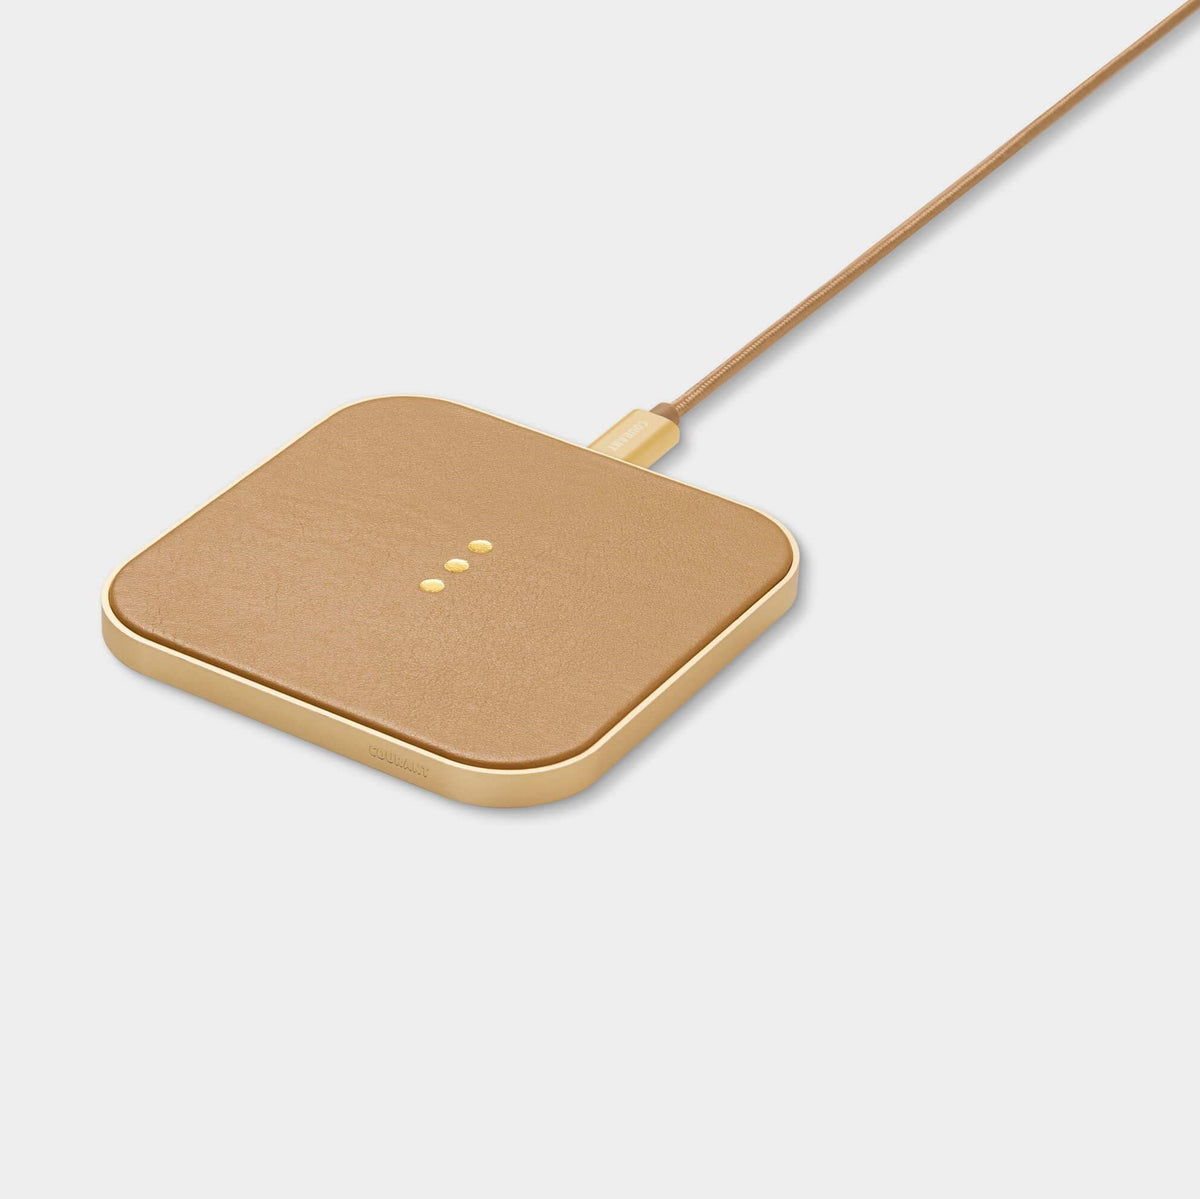 Catch 1 - Fast Wireless Phone Charger in Cortado